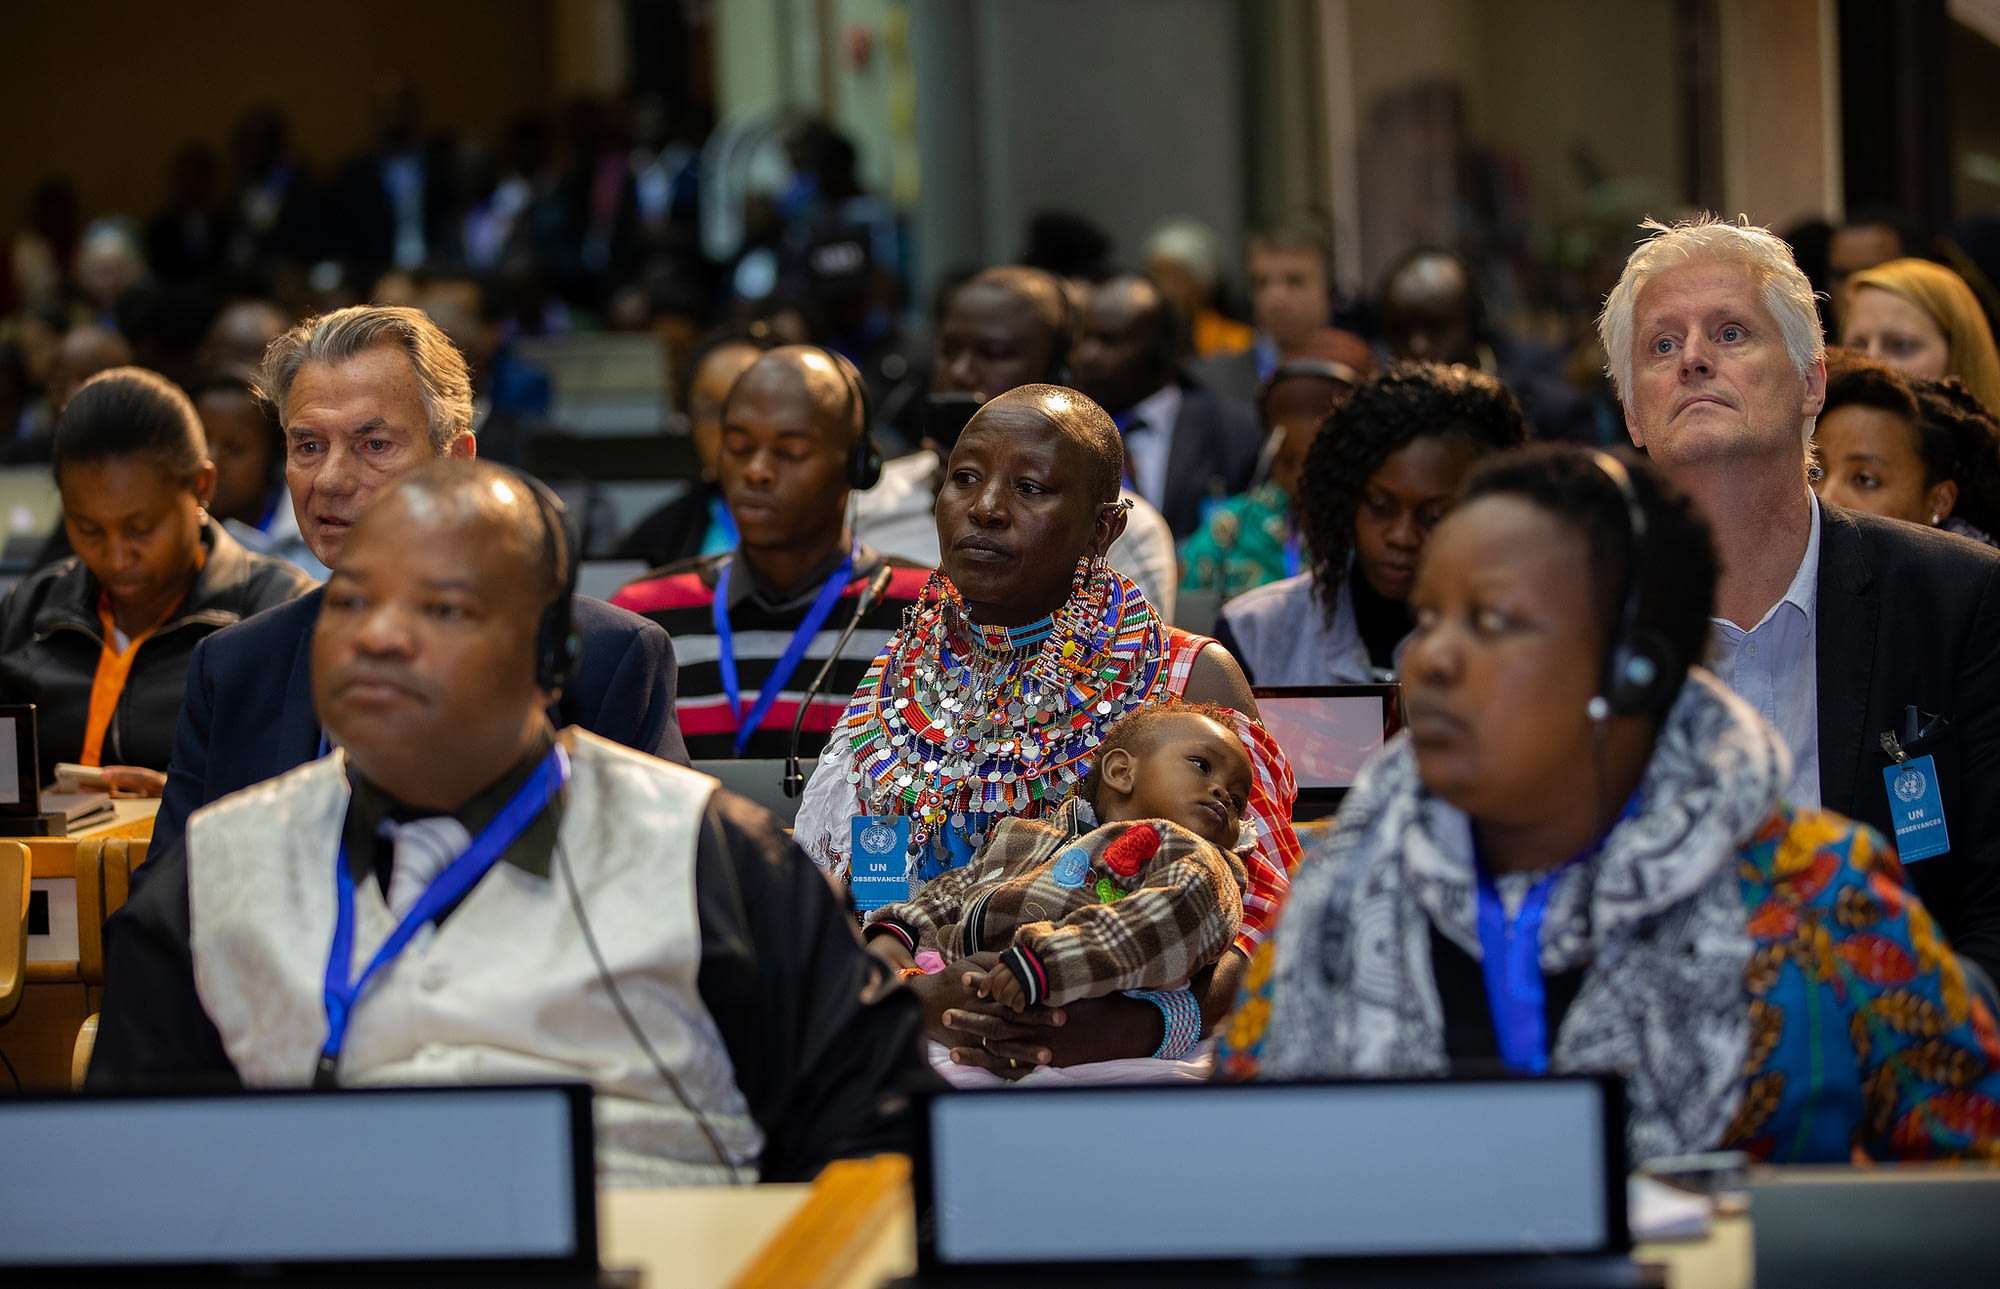 A Maasai woman holding a baby (center) attends the plenary session of the GLF Nairobi 2018. (Photo: Global Landscapes Forum)